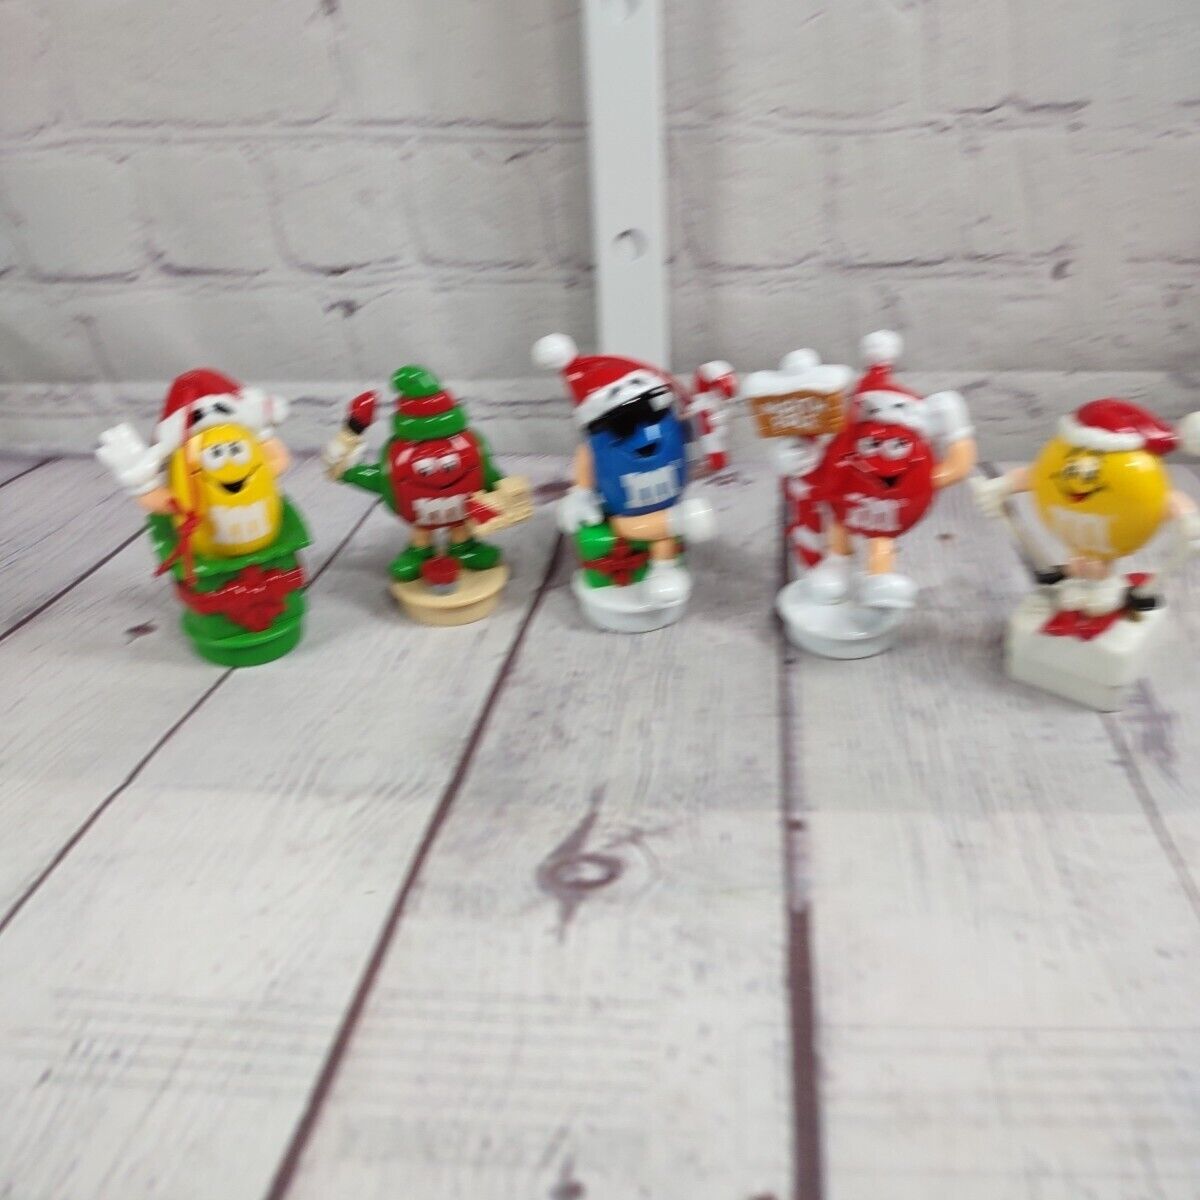 VTG 1990's Mars M&Ms Christmas Ornament Lot Of 5 Blue, Yellow, Red M&Ms 3 in